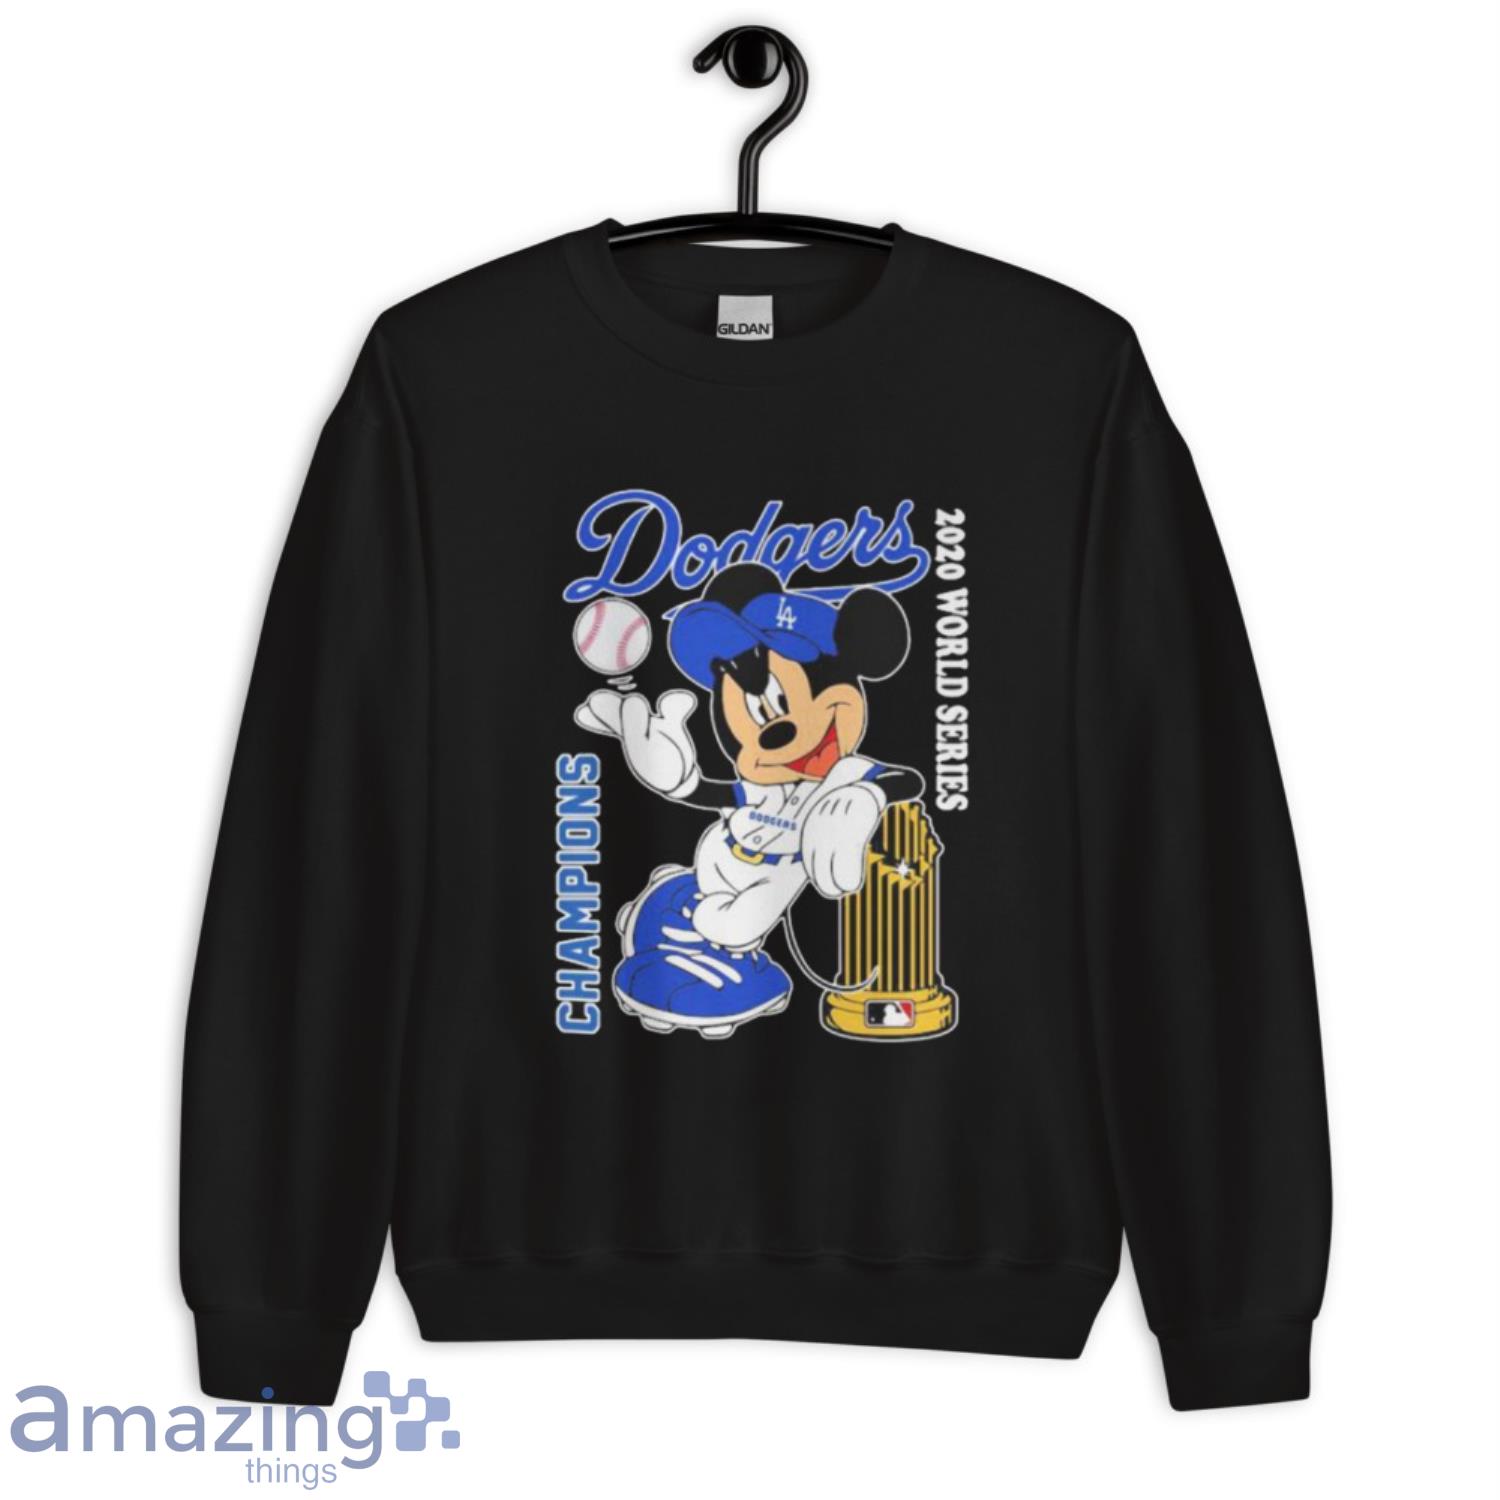 Mickey Mouse Los Angeles Dodgers Champion 2020 world Series shirt